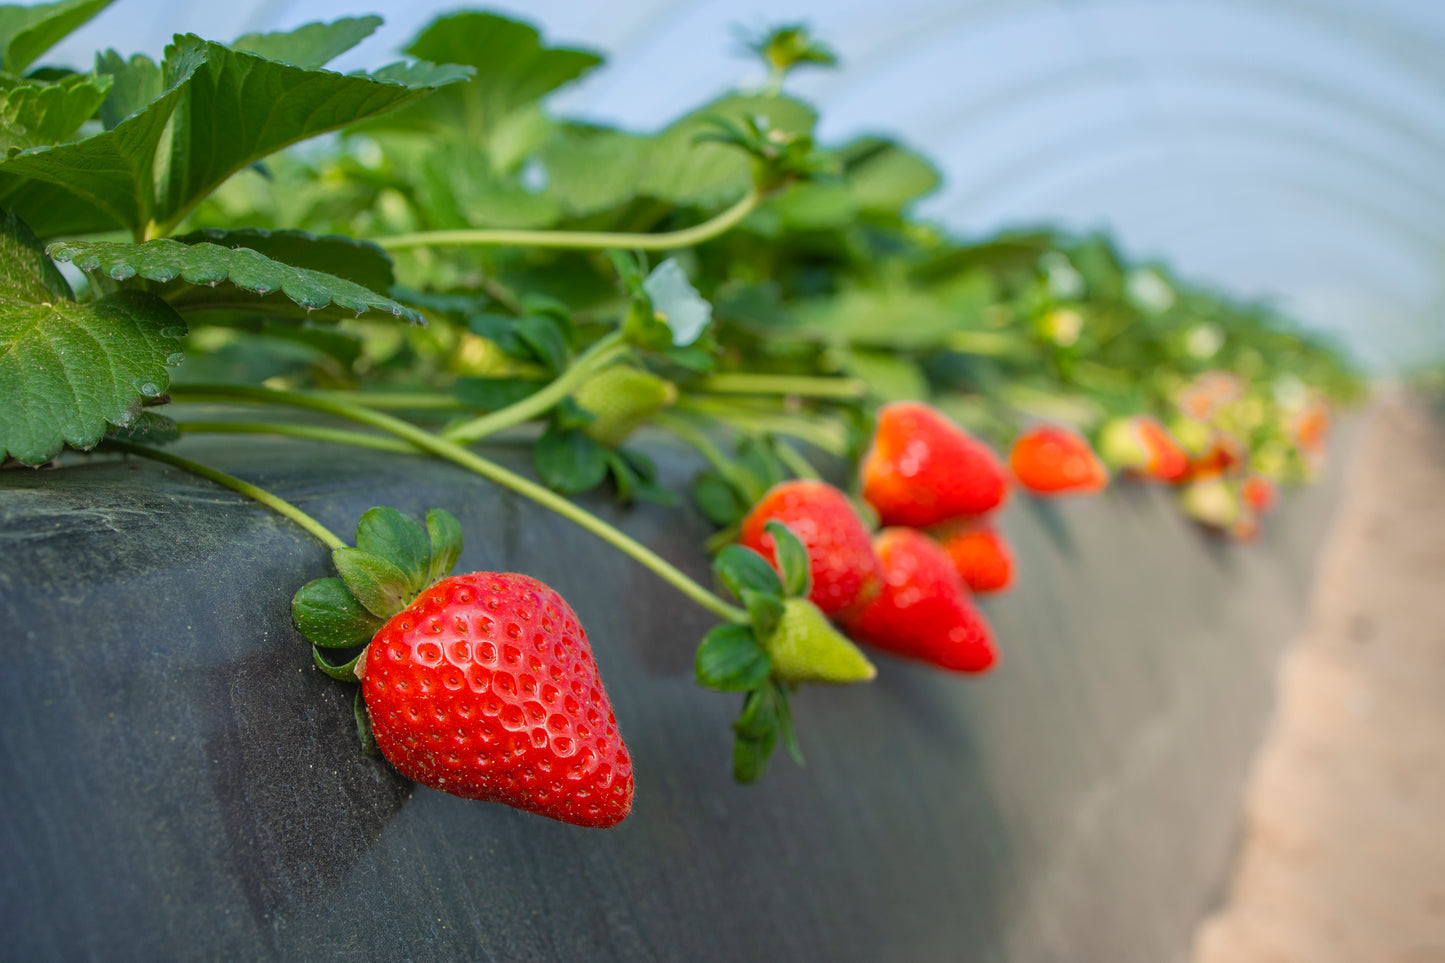 A close up of one perfectly formed berry in a row of strawberry plants with many ripe and unripe berries hanging on the side of a strawberry bed